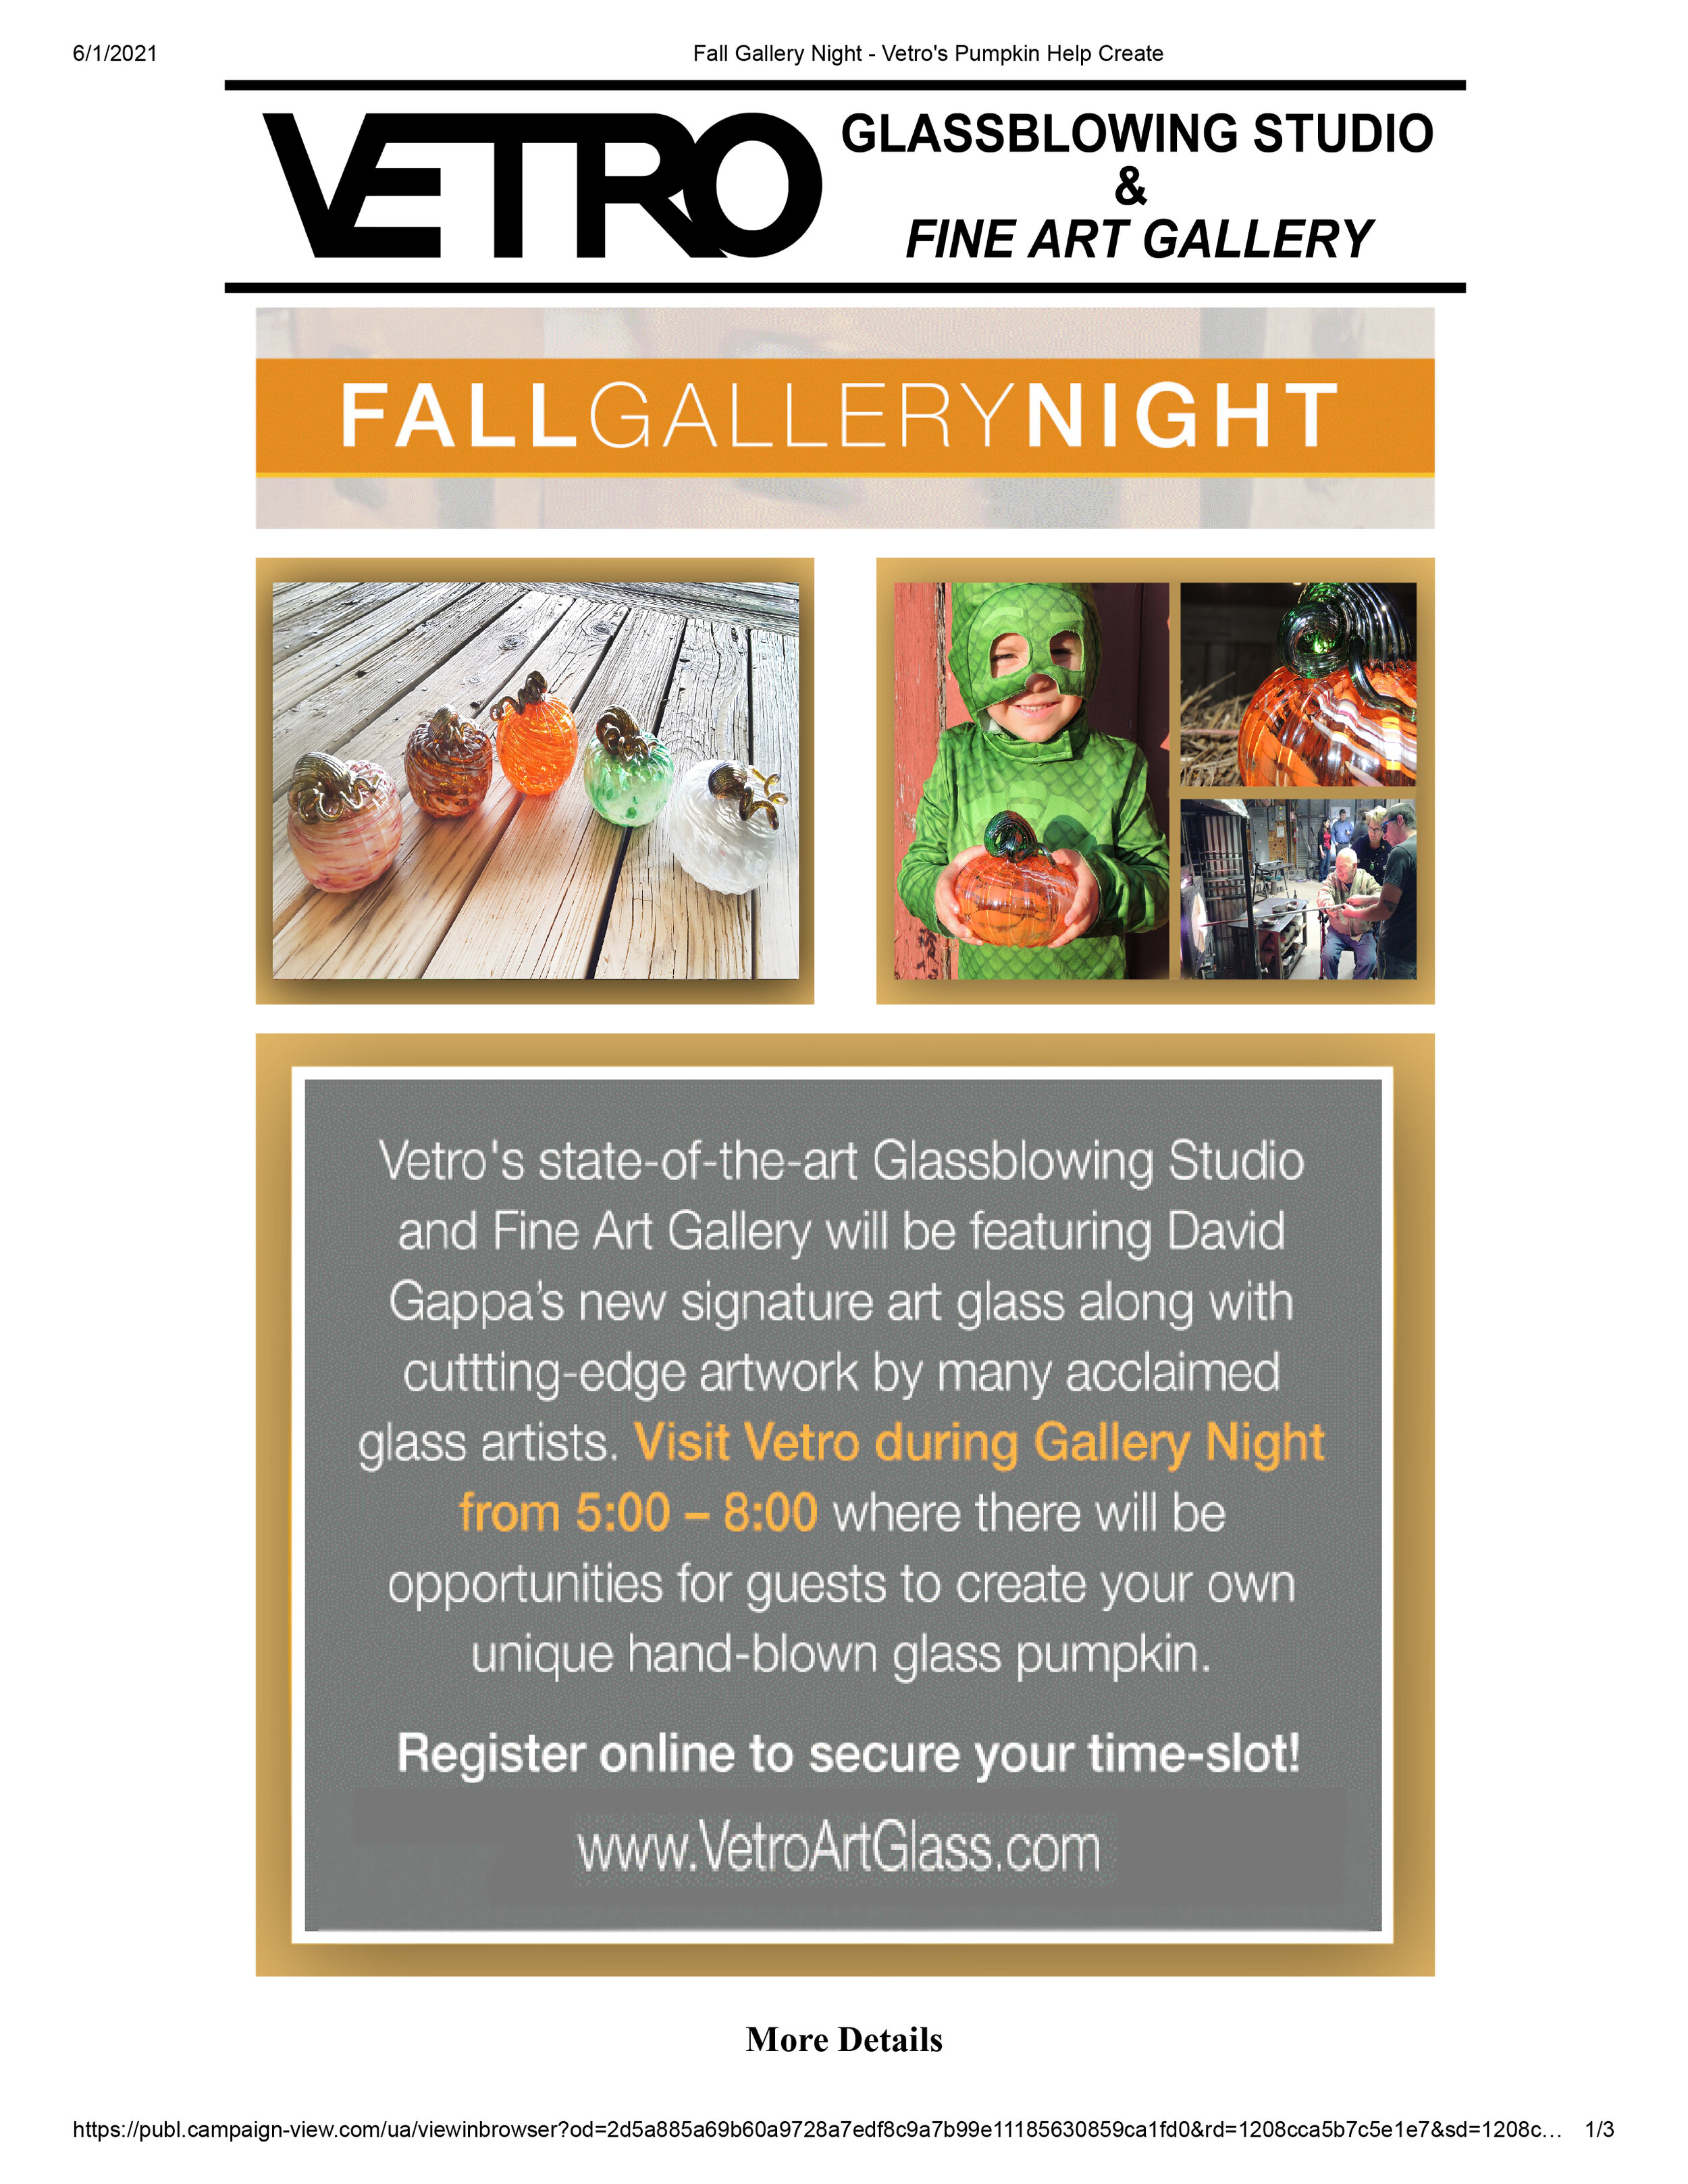 Email Campaigns -Vetro Glassblowing Studio - Fall Gallery Night-1.jpg